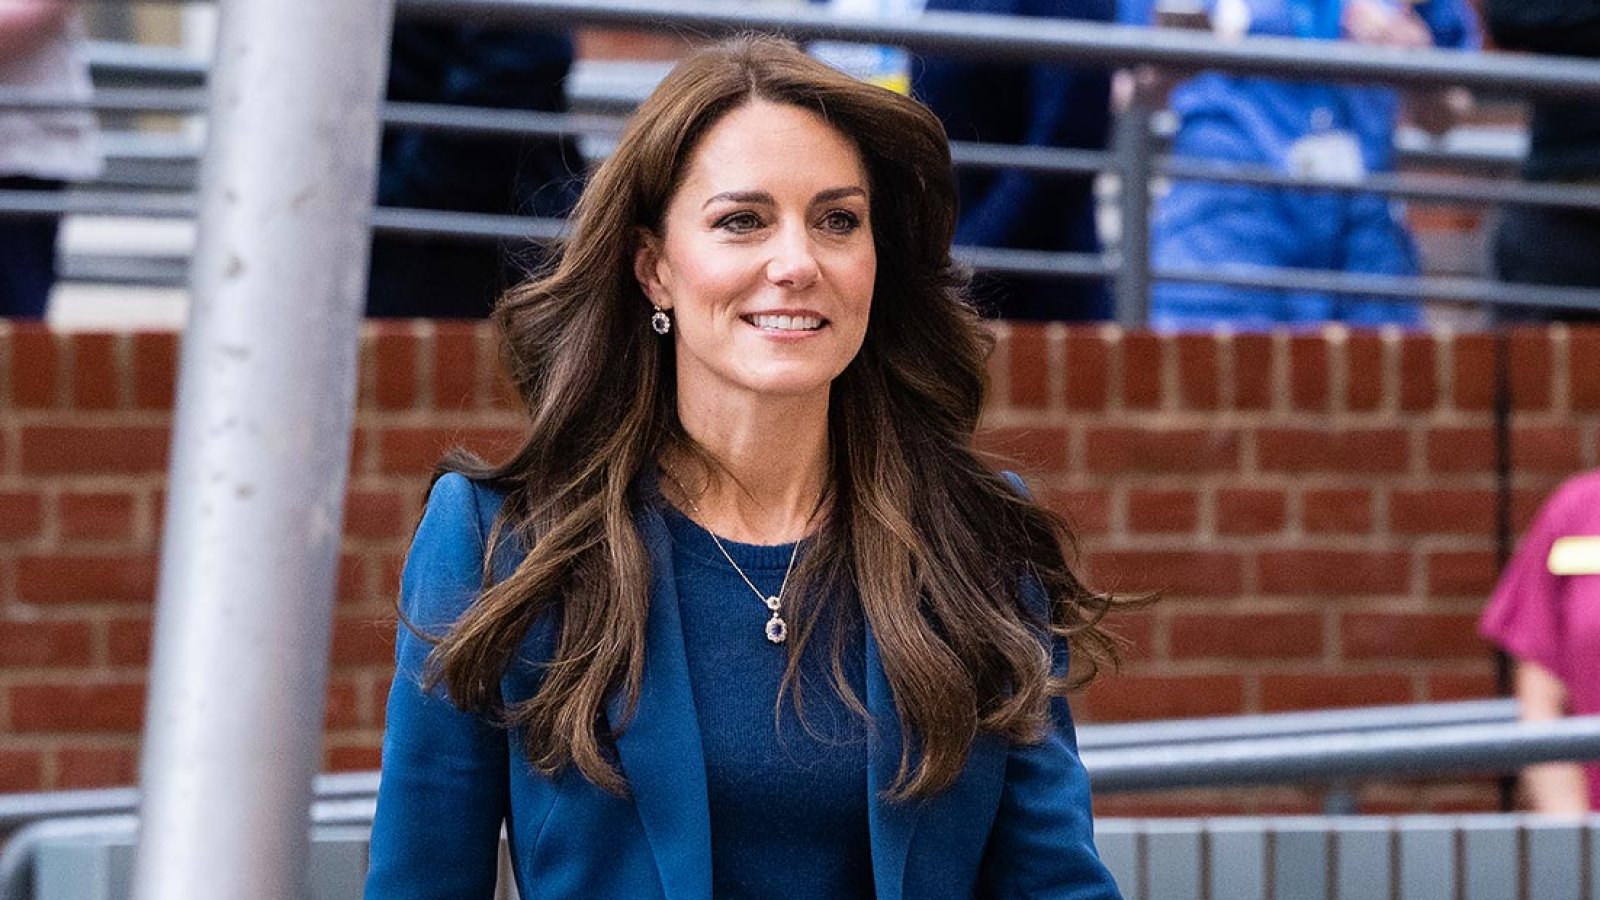 What Kate Middleton Casual Outfit on Latest Public Outing With Prince William Tells Us